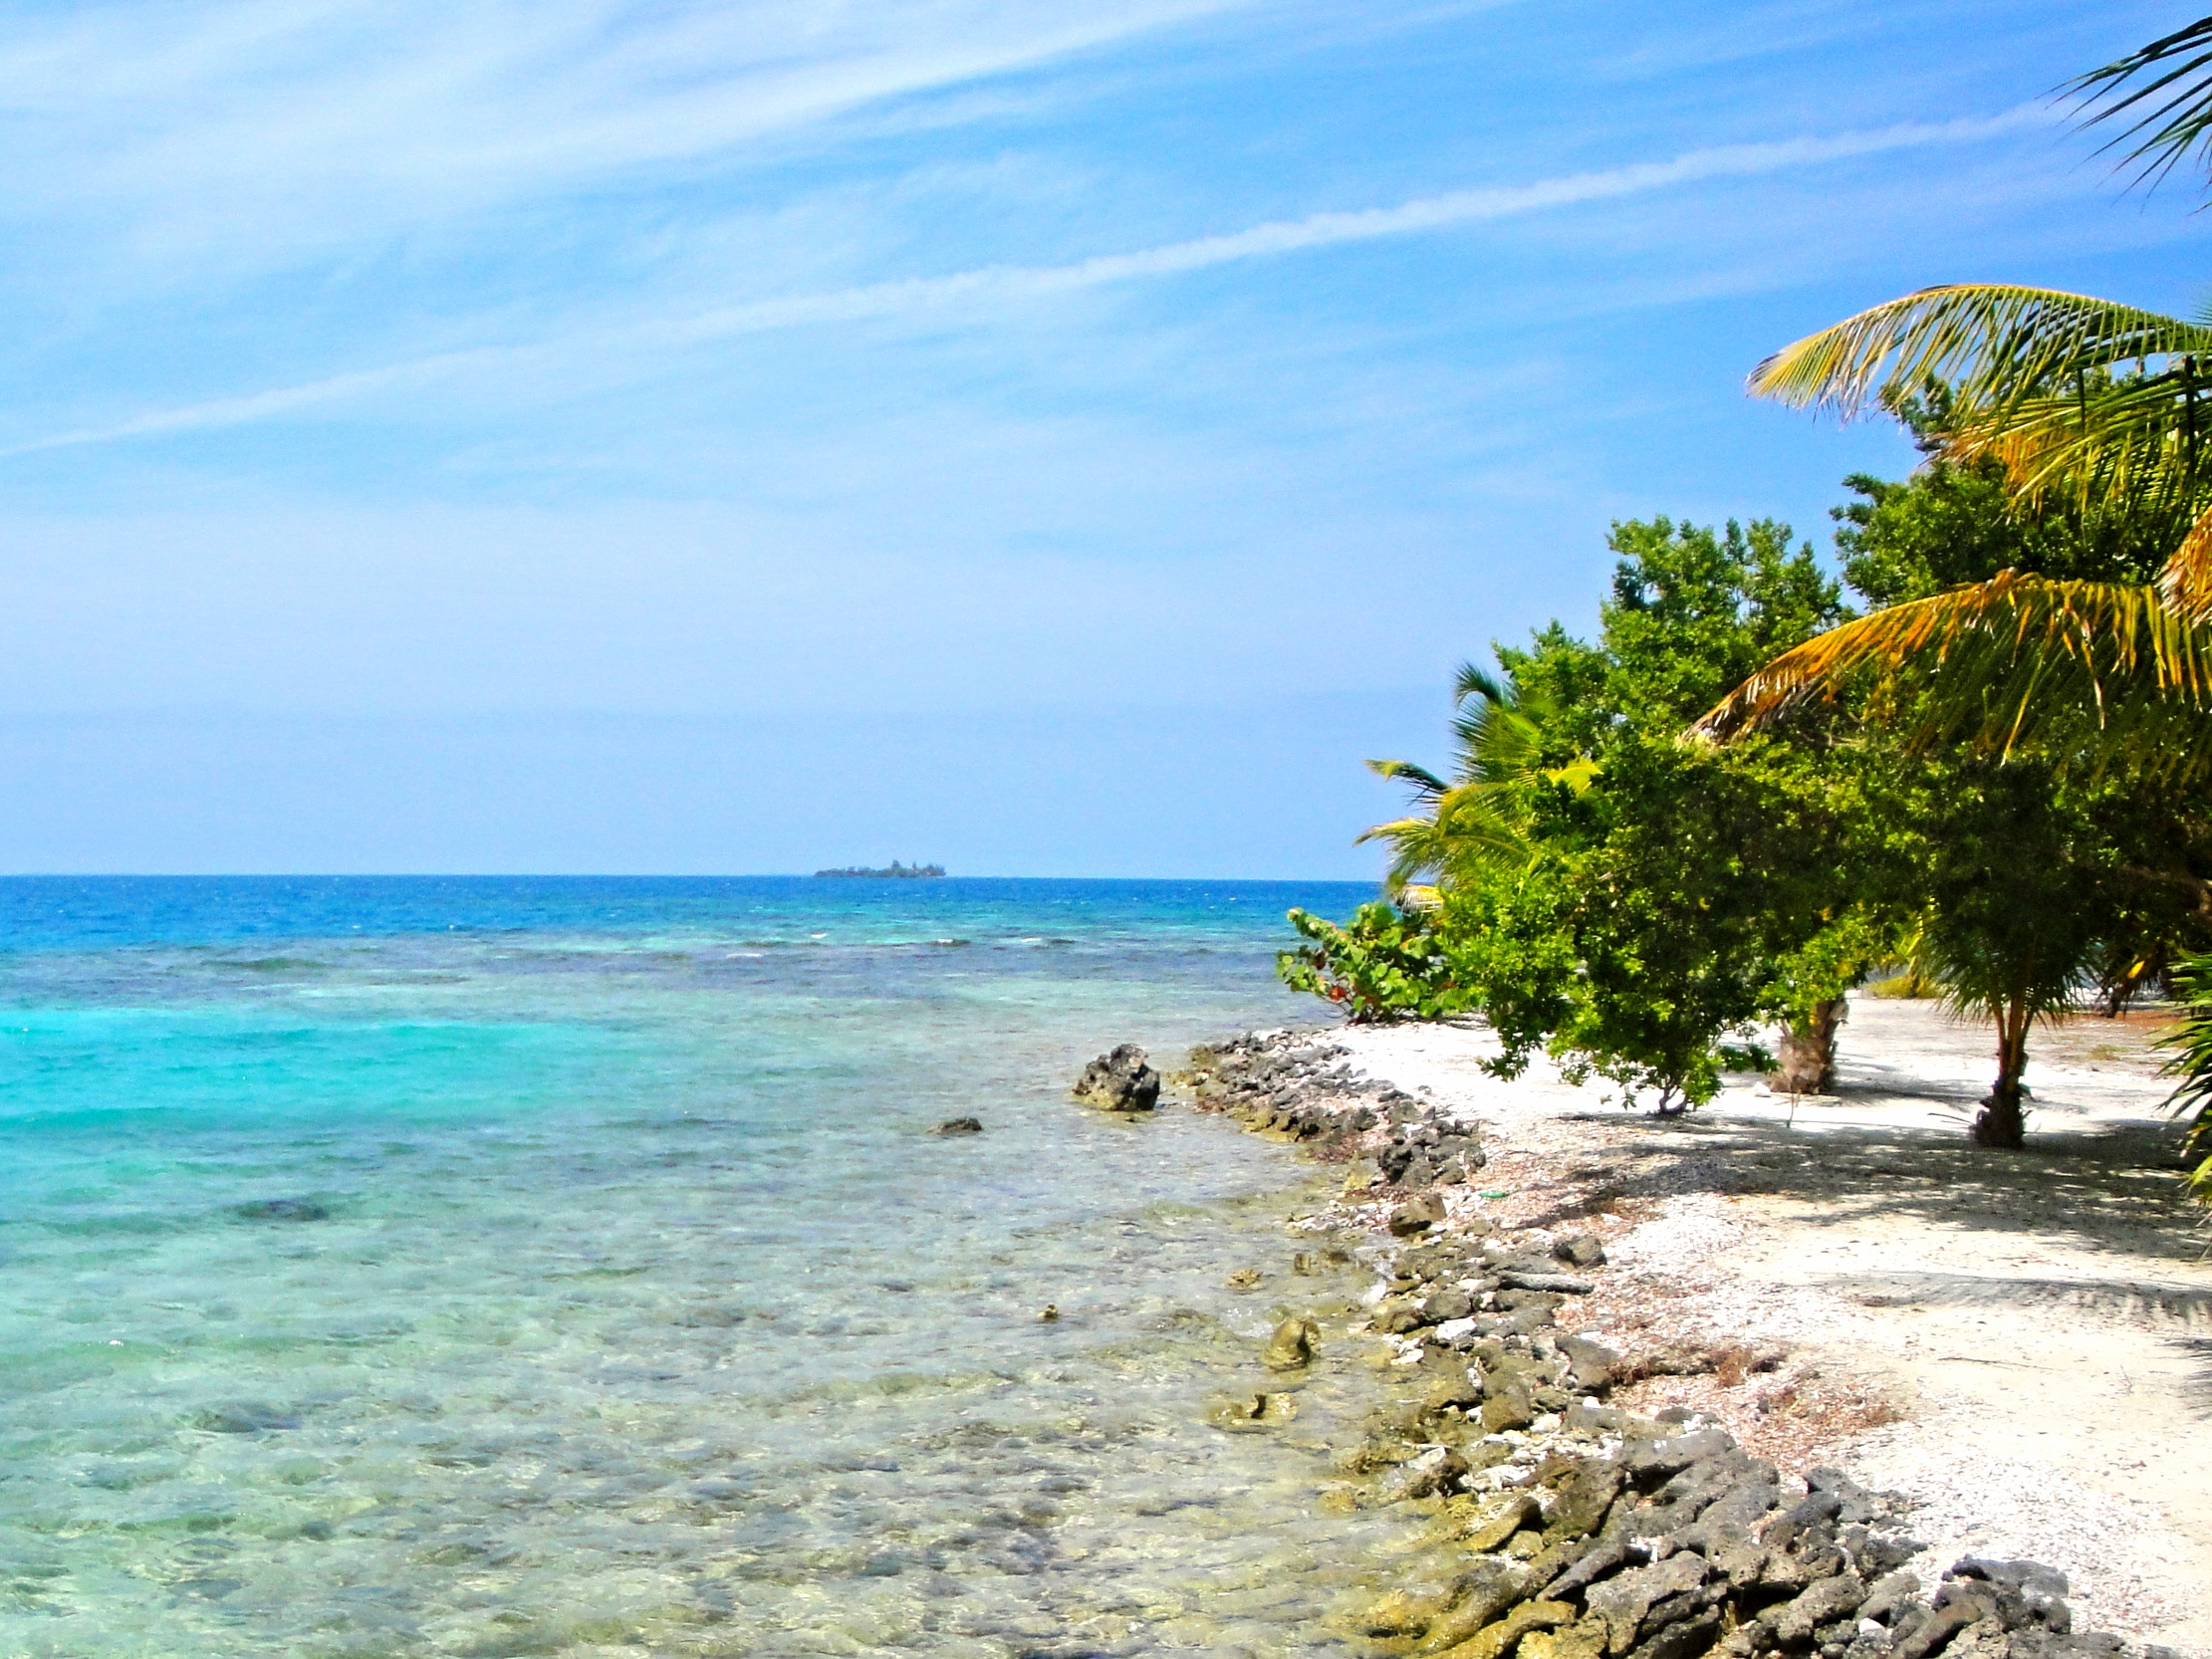 Stop at a remote Caye for a picnic while out on a snorkel or fishing trip